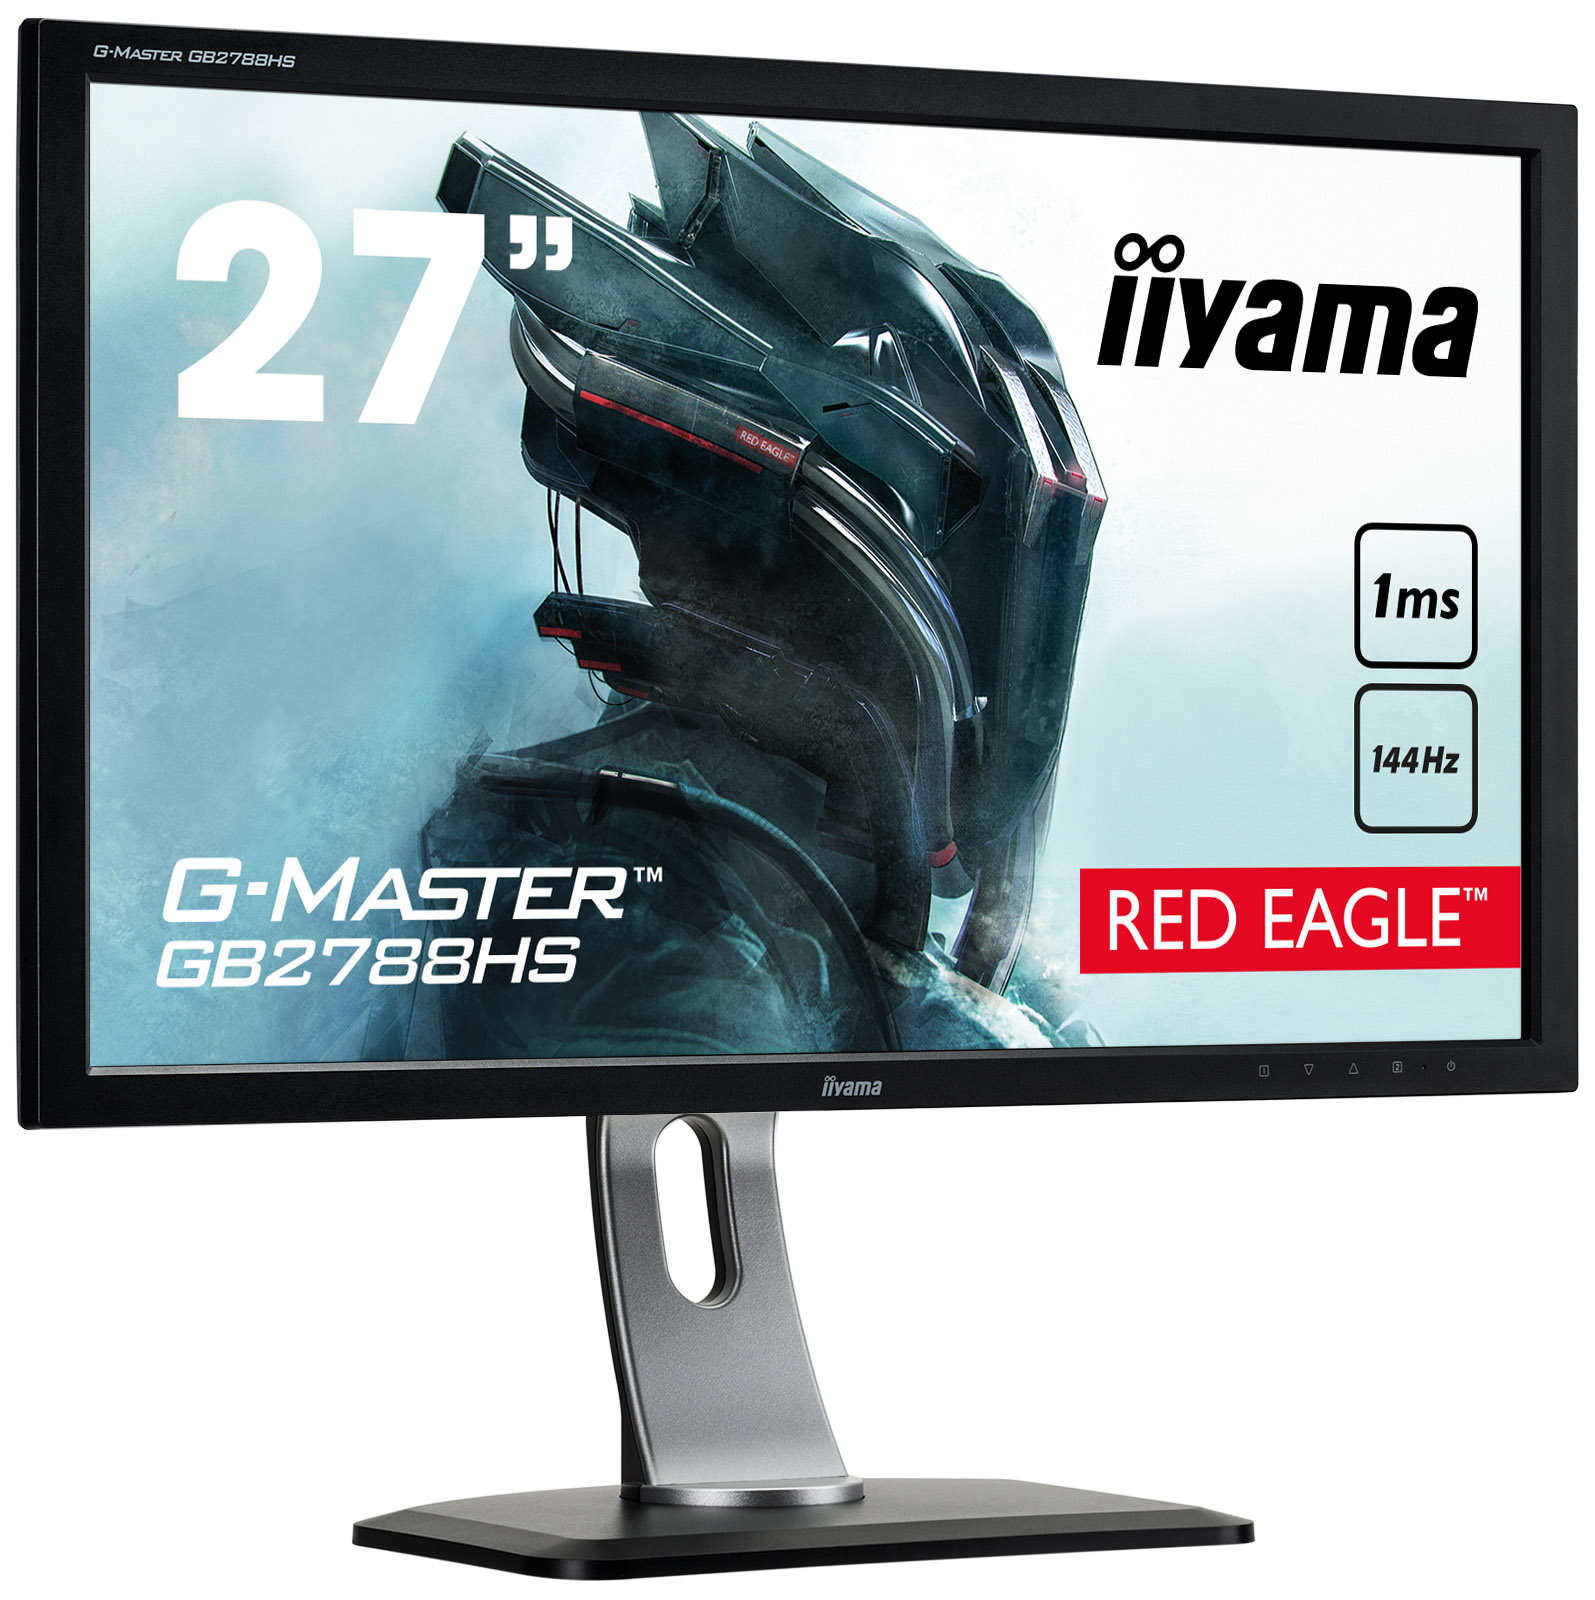 iiyama - G-MASTER GB2788HS-B2 Red Eagle - fly high with your 